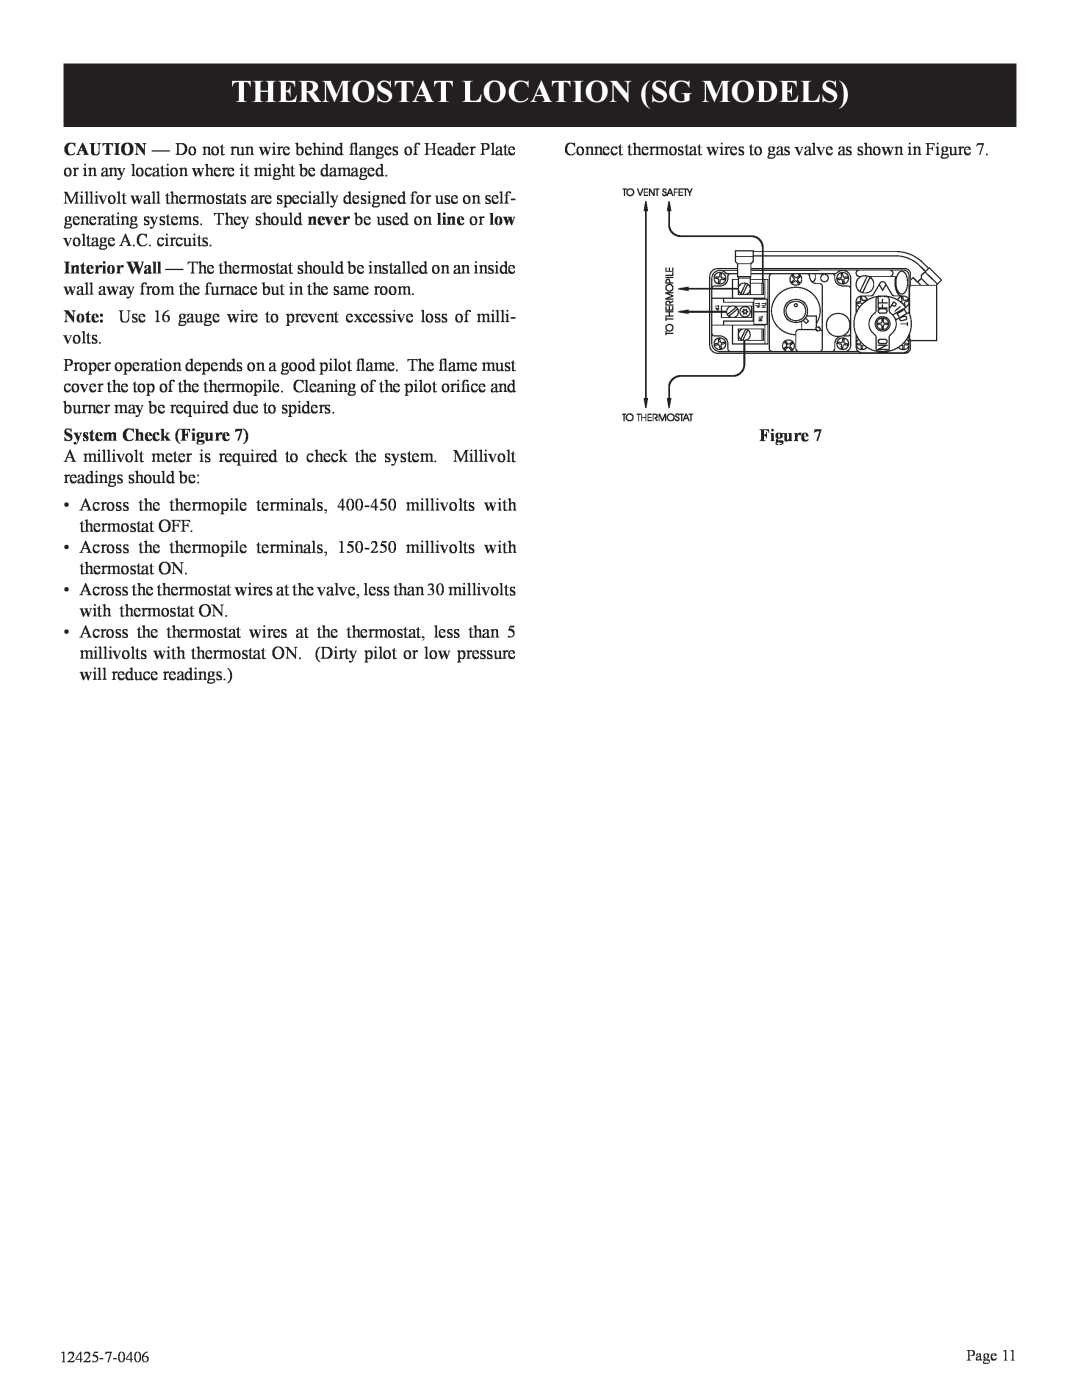 Empire Products GWT-25-2, GWT-35-2, RB) installation instructions Thermostat Location Sg Models, System Check Figure 